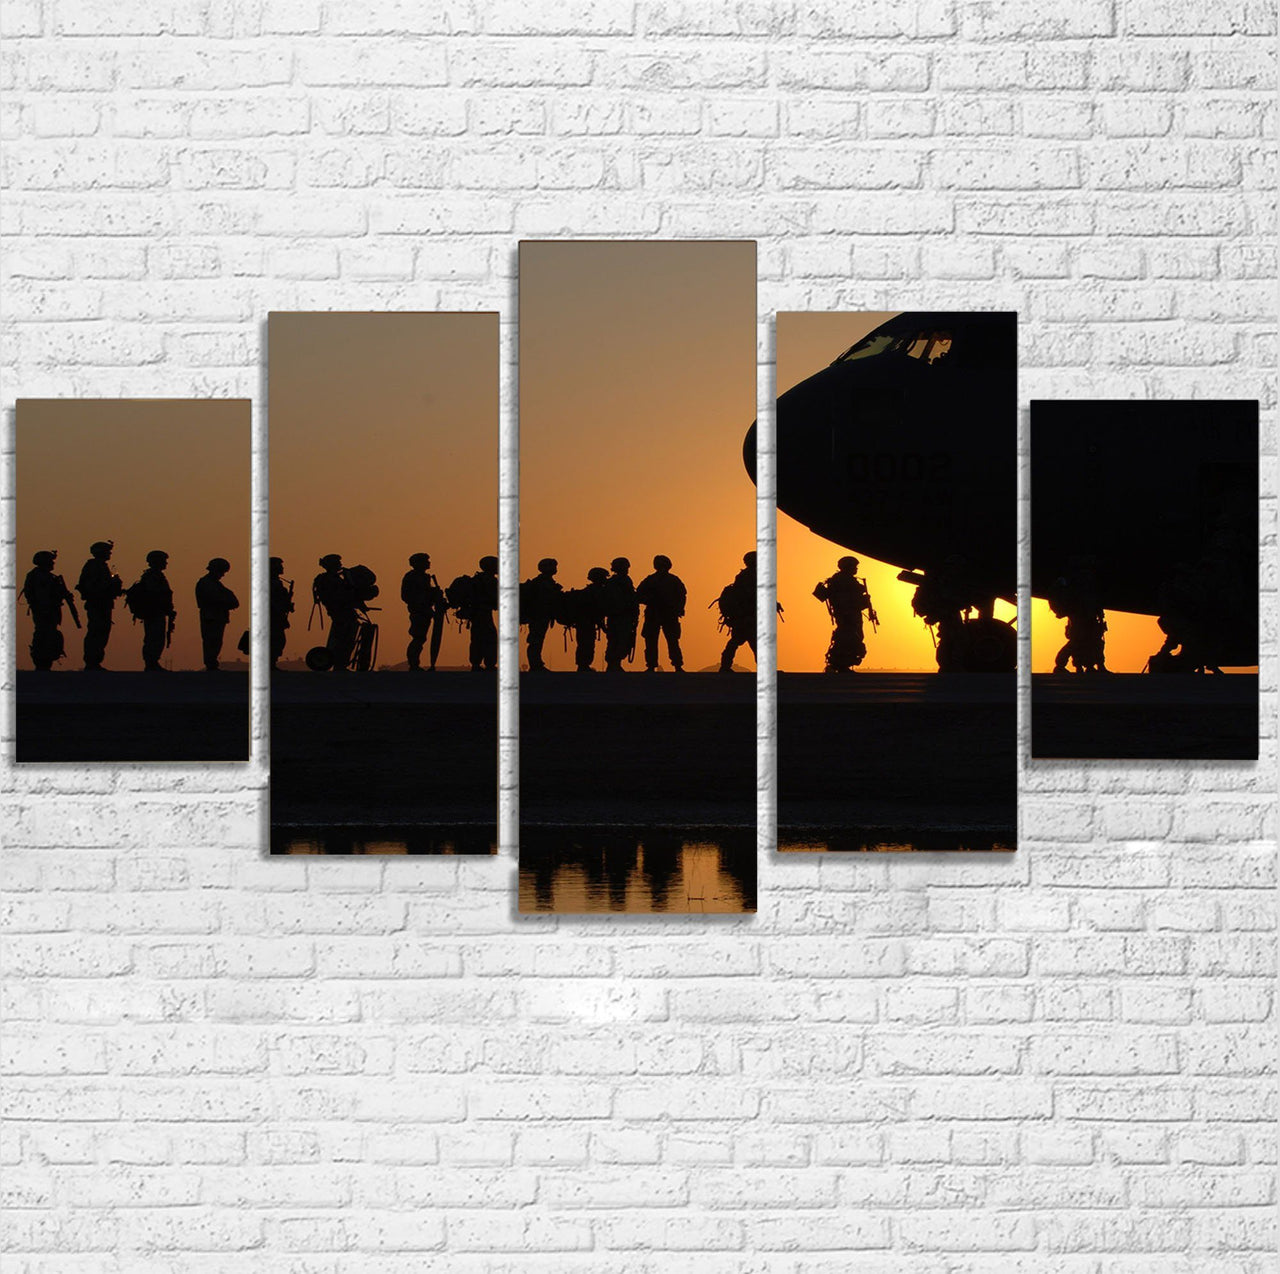 Band of Brothers Theme Soldiers Printed Multiple Canvas Poster Aviation Shop 